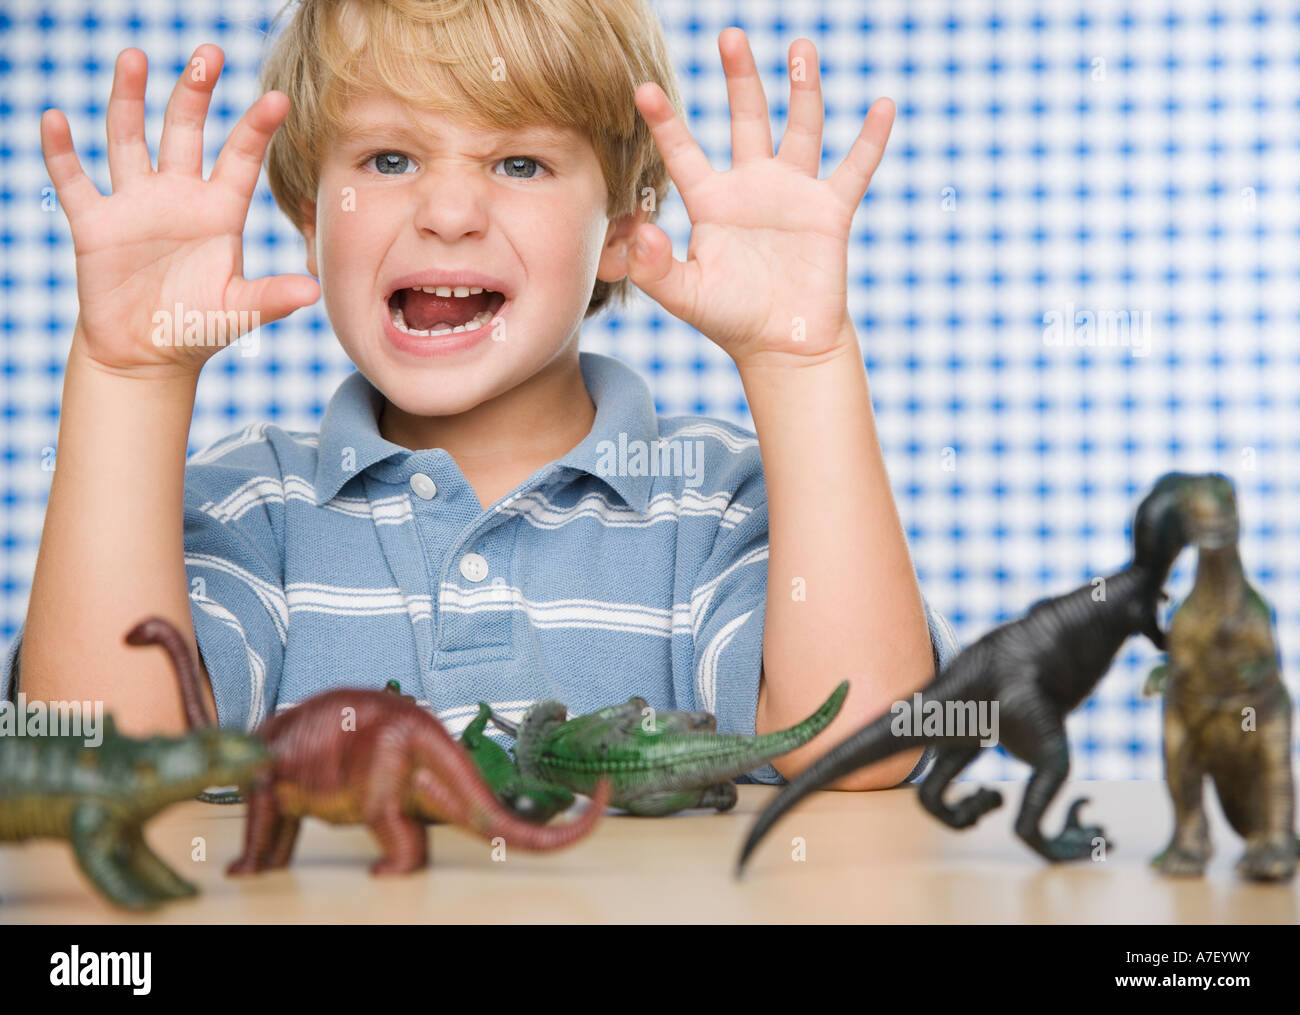 Young boy making face with toy dinosaurs Stock Photo